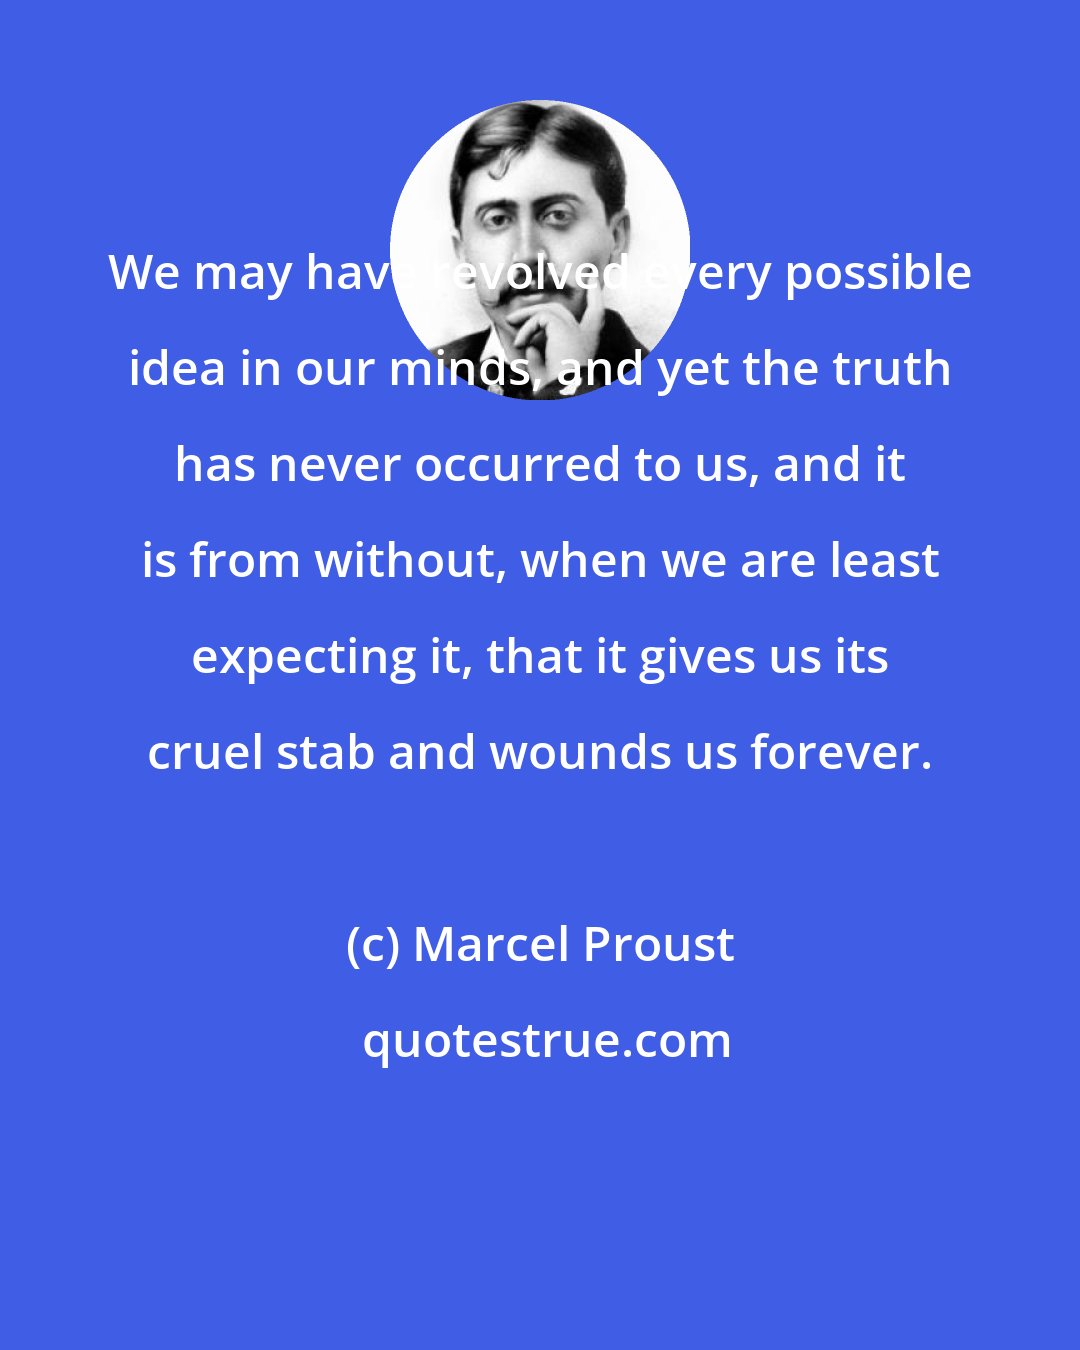 Marcel Proust: We may have revolved every possible idea in our minds, and yet the truth has never occurred to us, and it is from without, when we are least expecting it, that it gives us its cruel stab and wounds us forever.